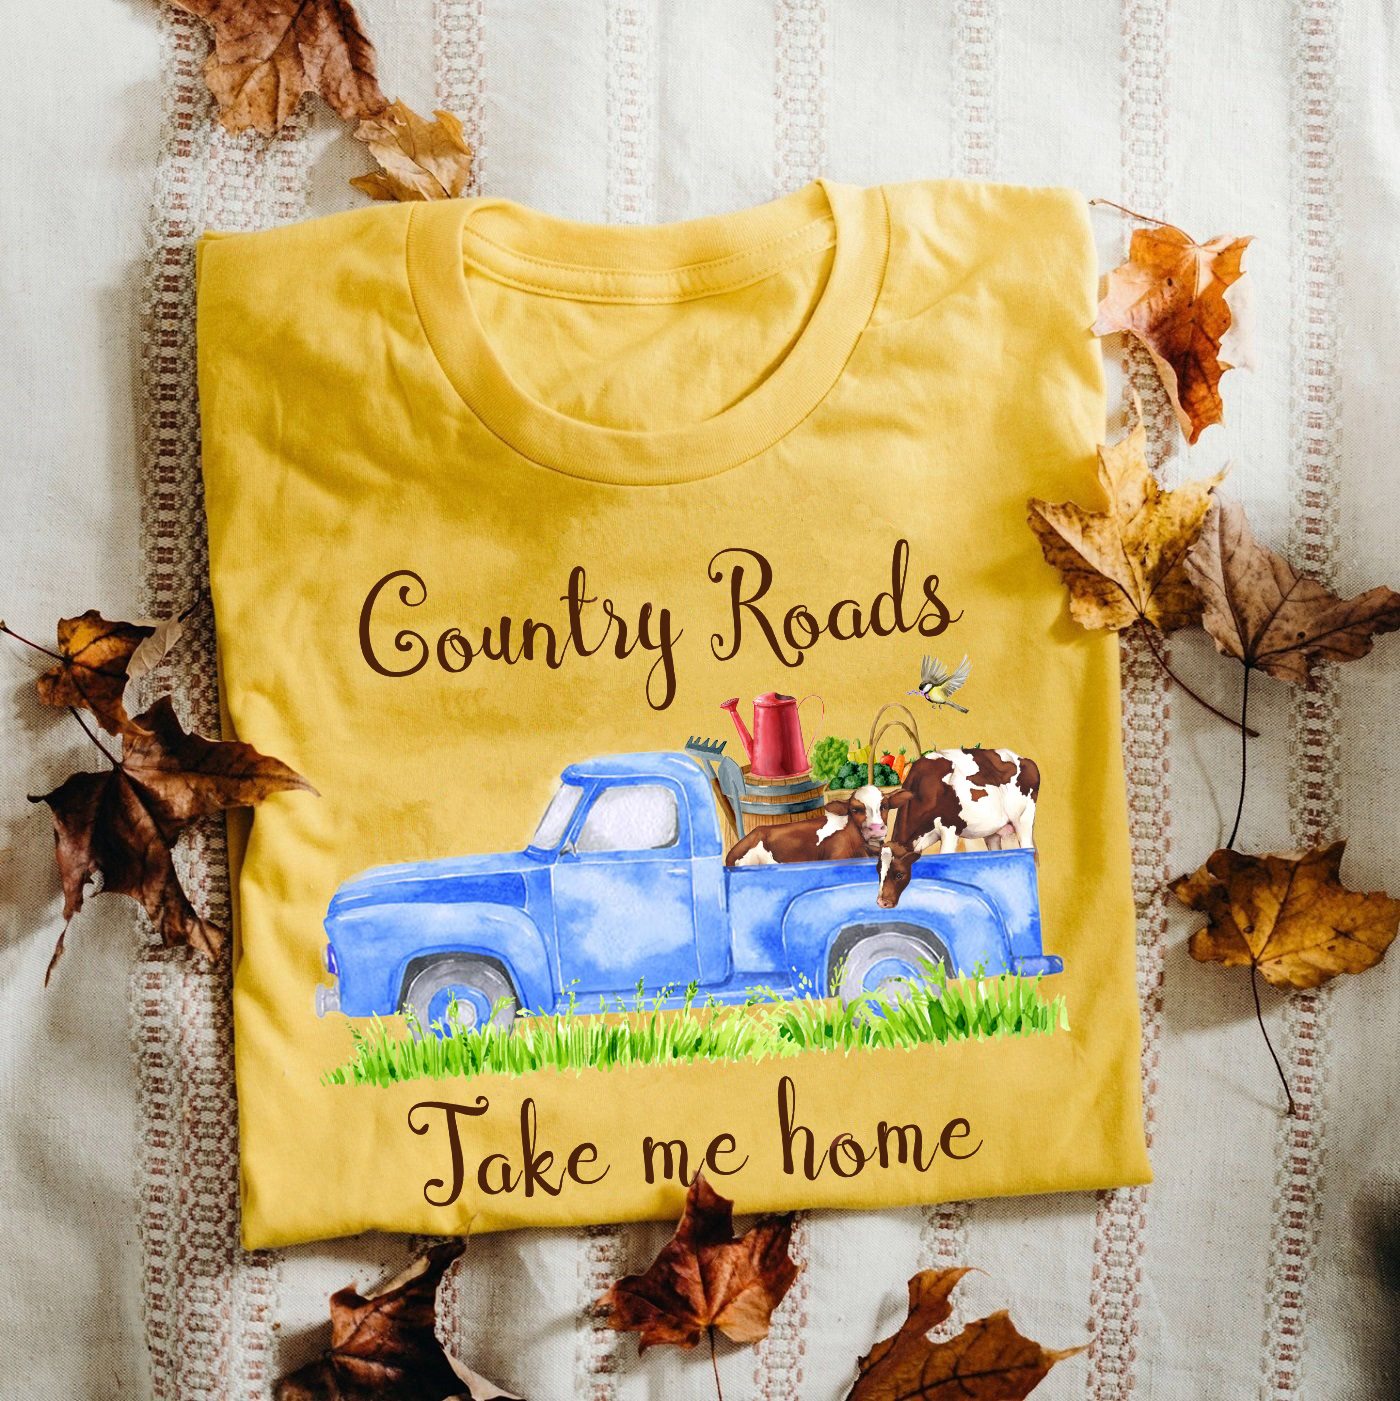 Country roads take me home - Truck with goat